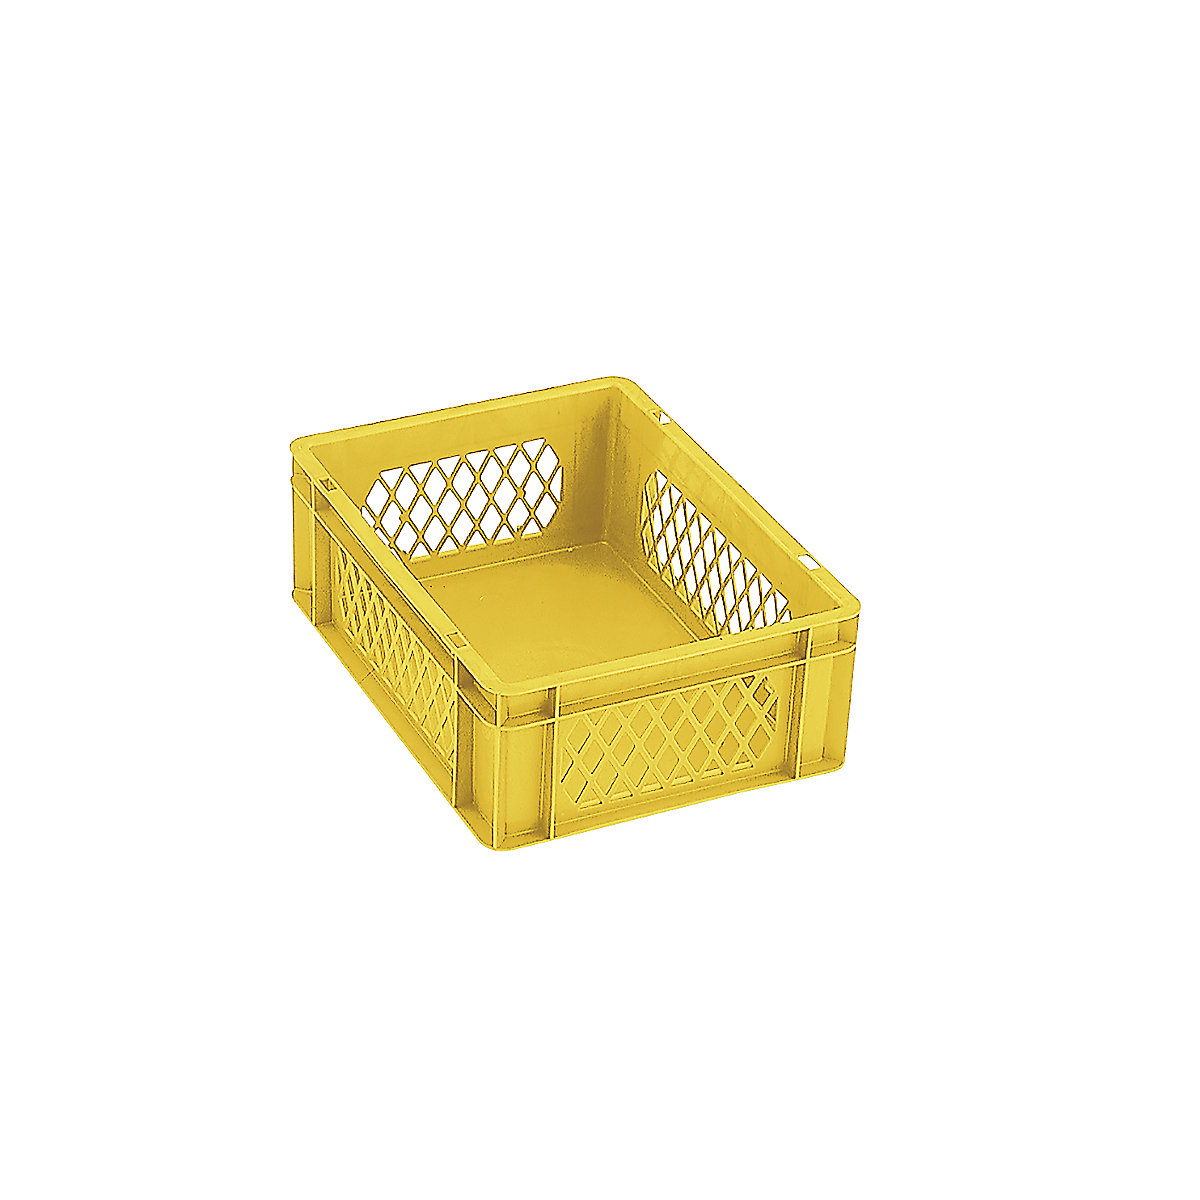 Euro stacking container, perforated walls, closed base, LxWxH 400 x 300 x 145 mm, yellow, pack of 5